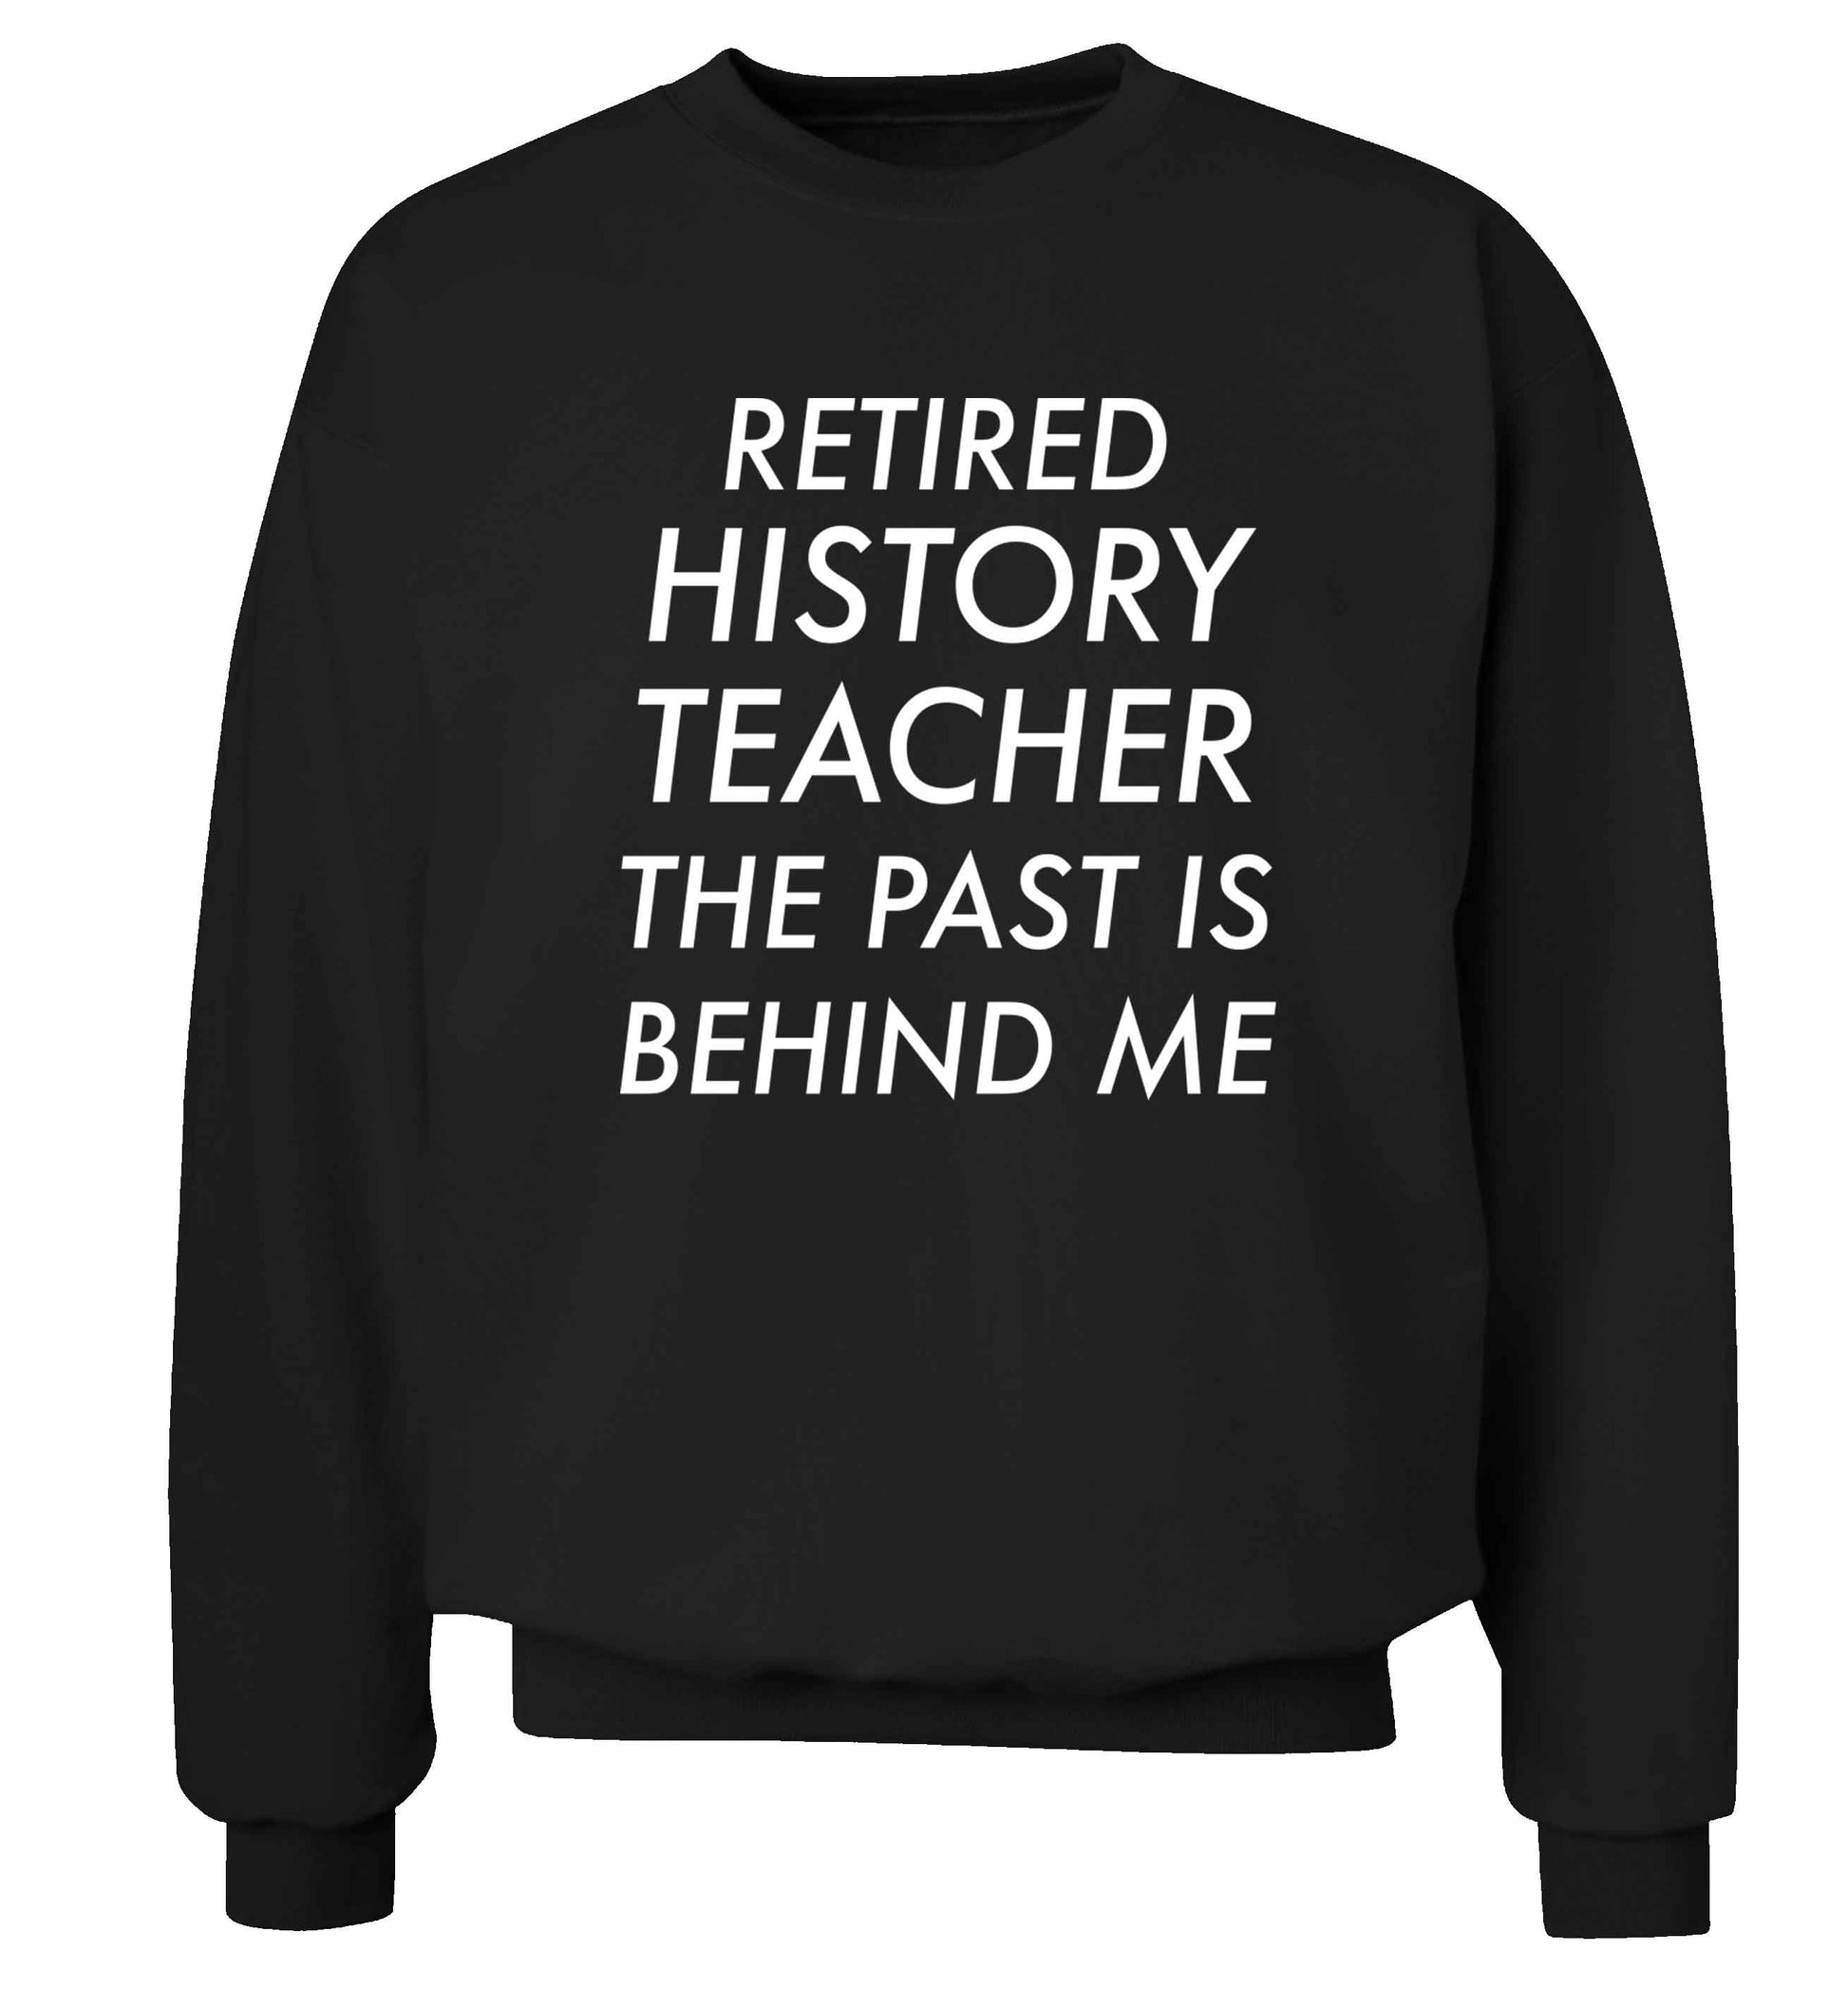 Retired history teacher the past is behind me Adult's unisex black Sweater 2XL